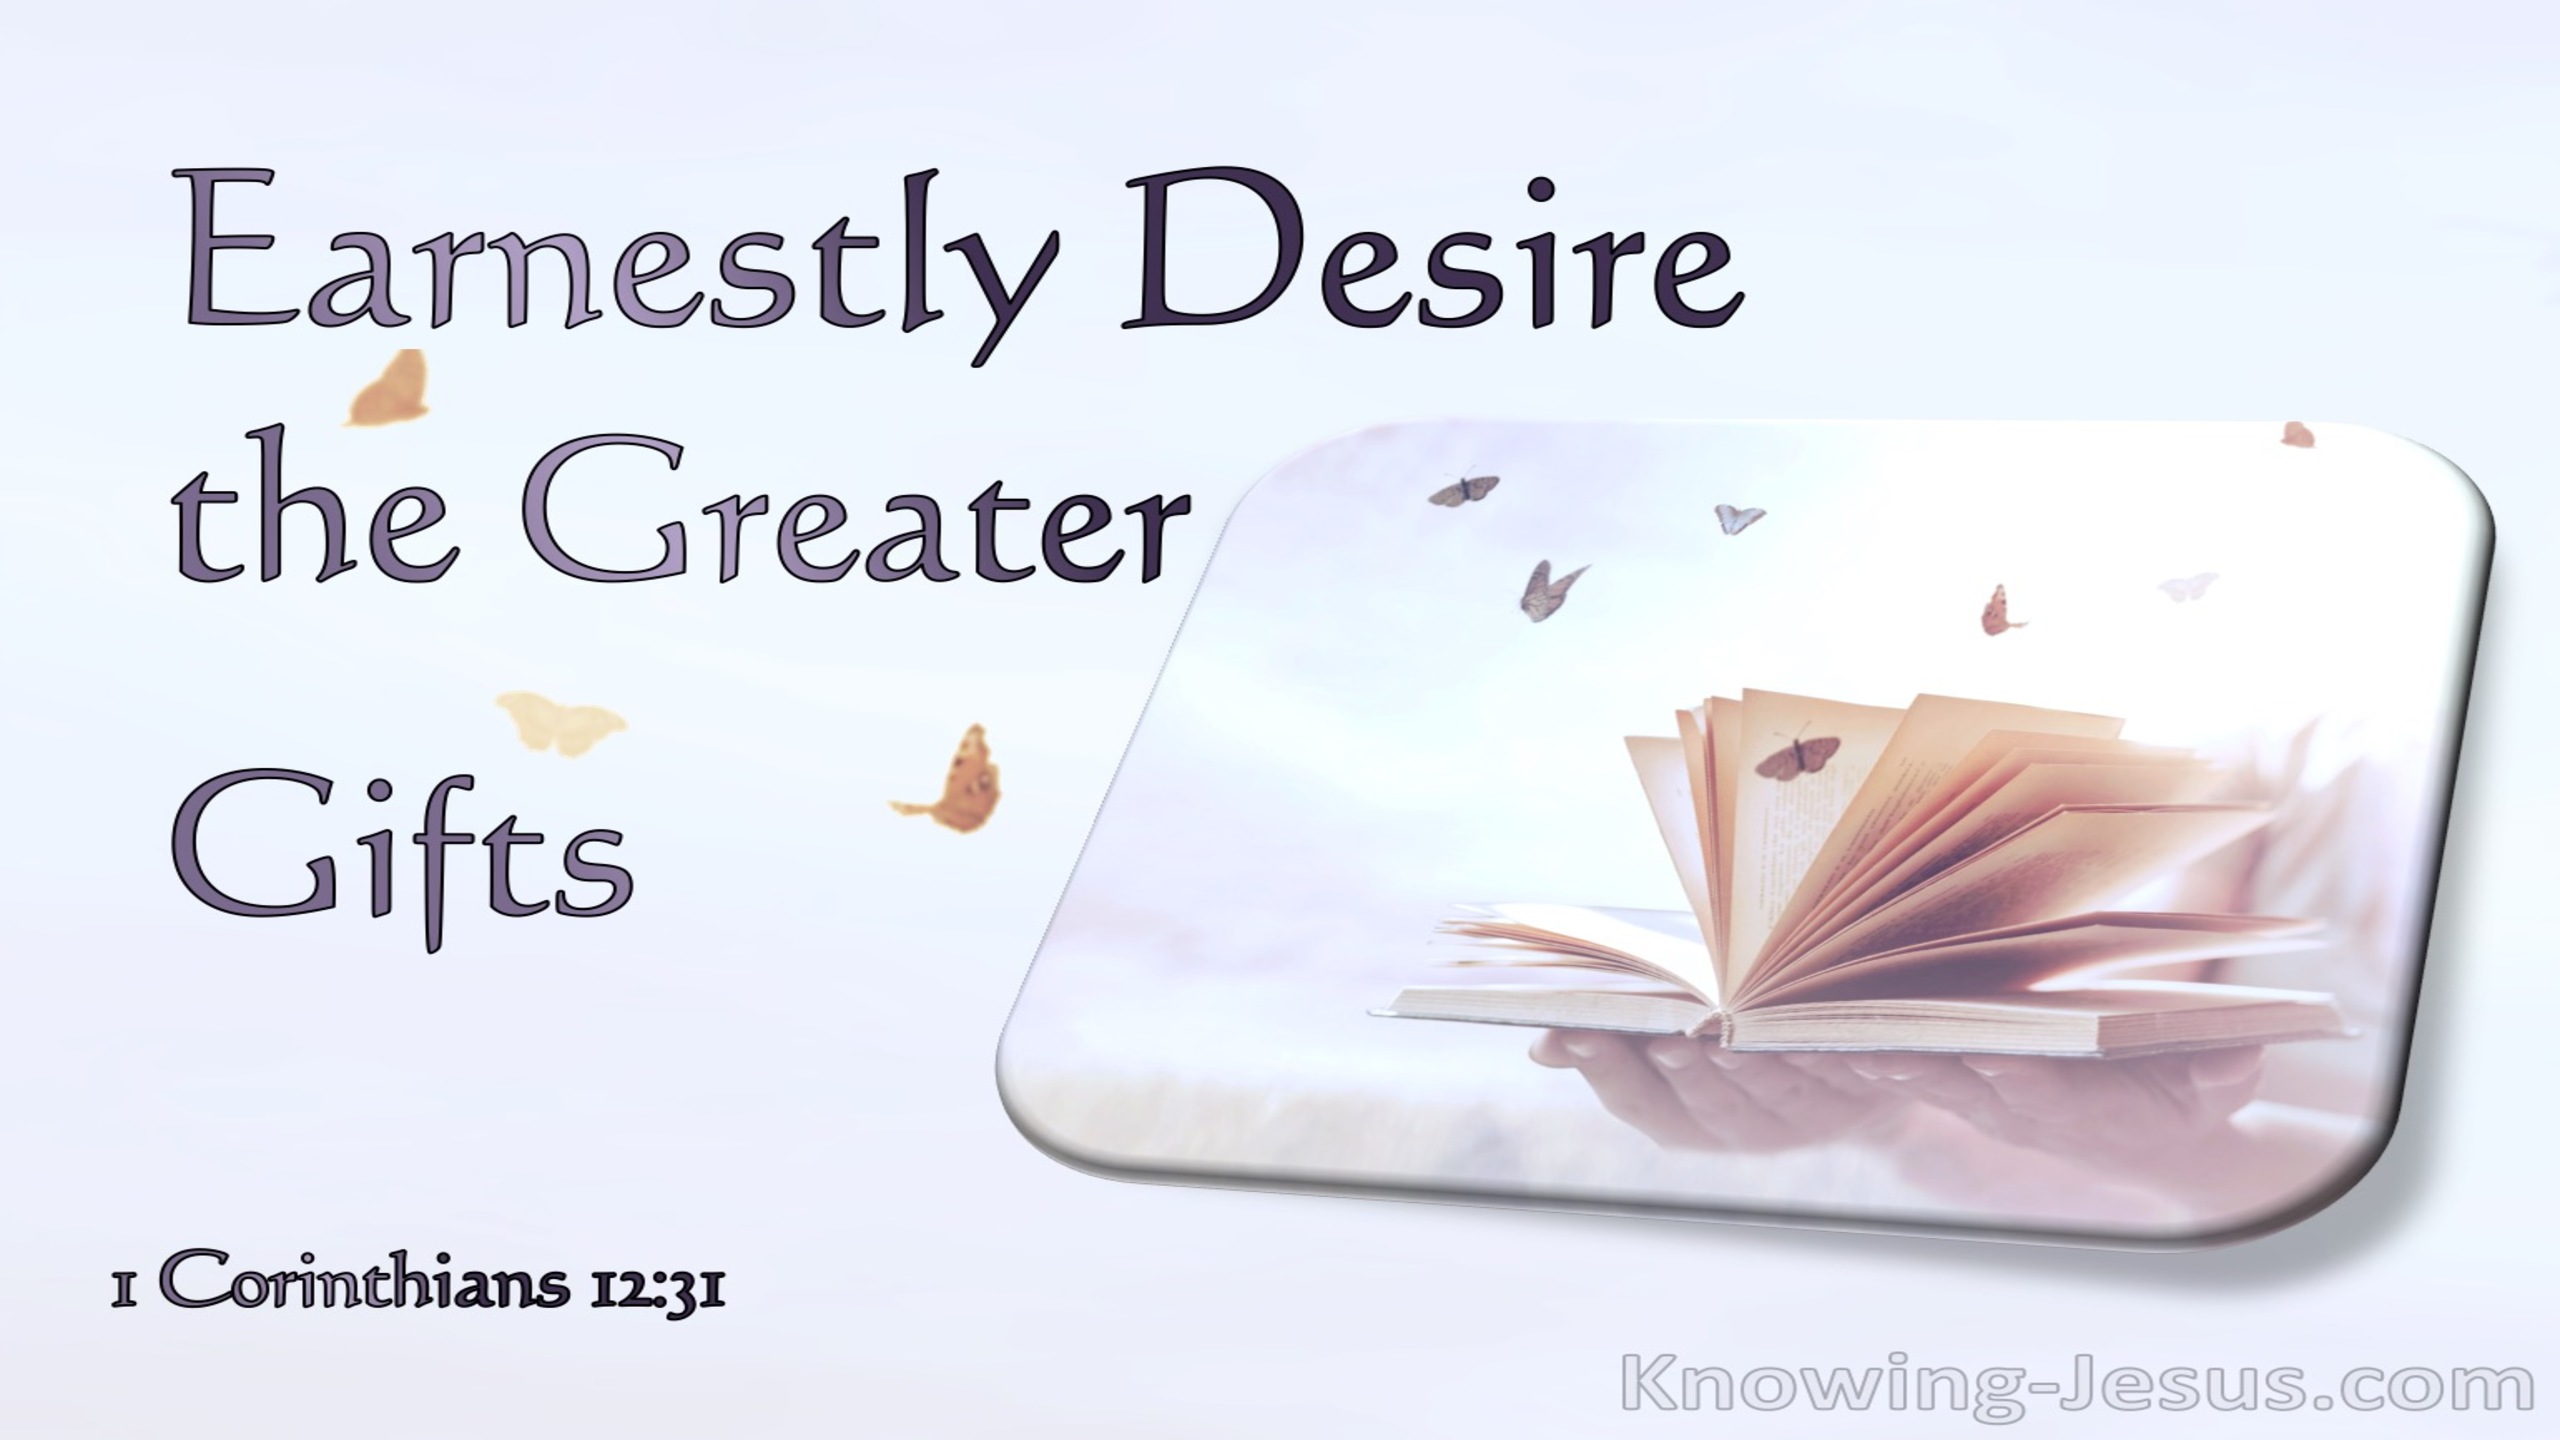 1 Corinthians 12:31 Earnestly Desire The Greater Gifts (purple)